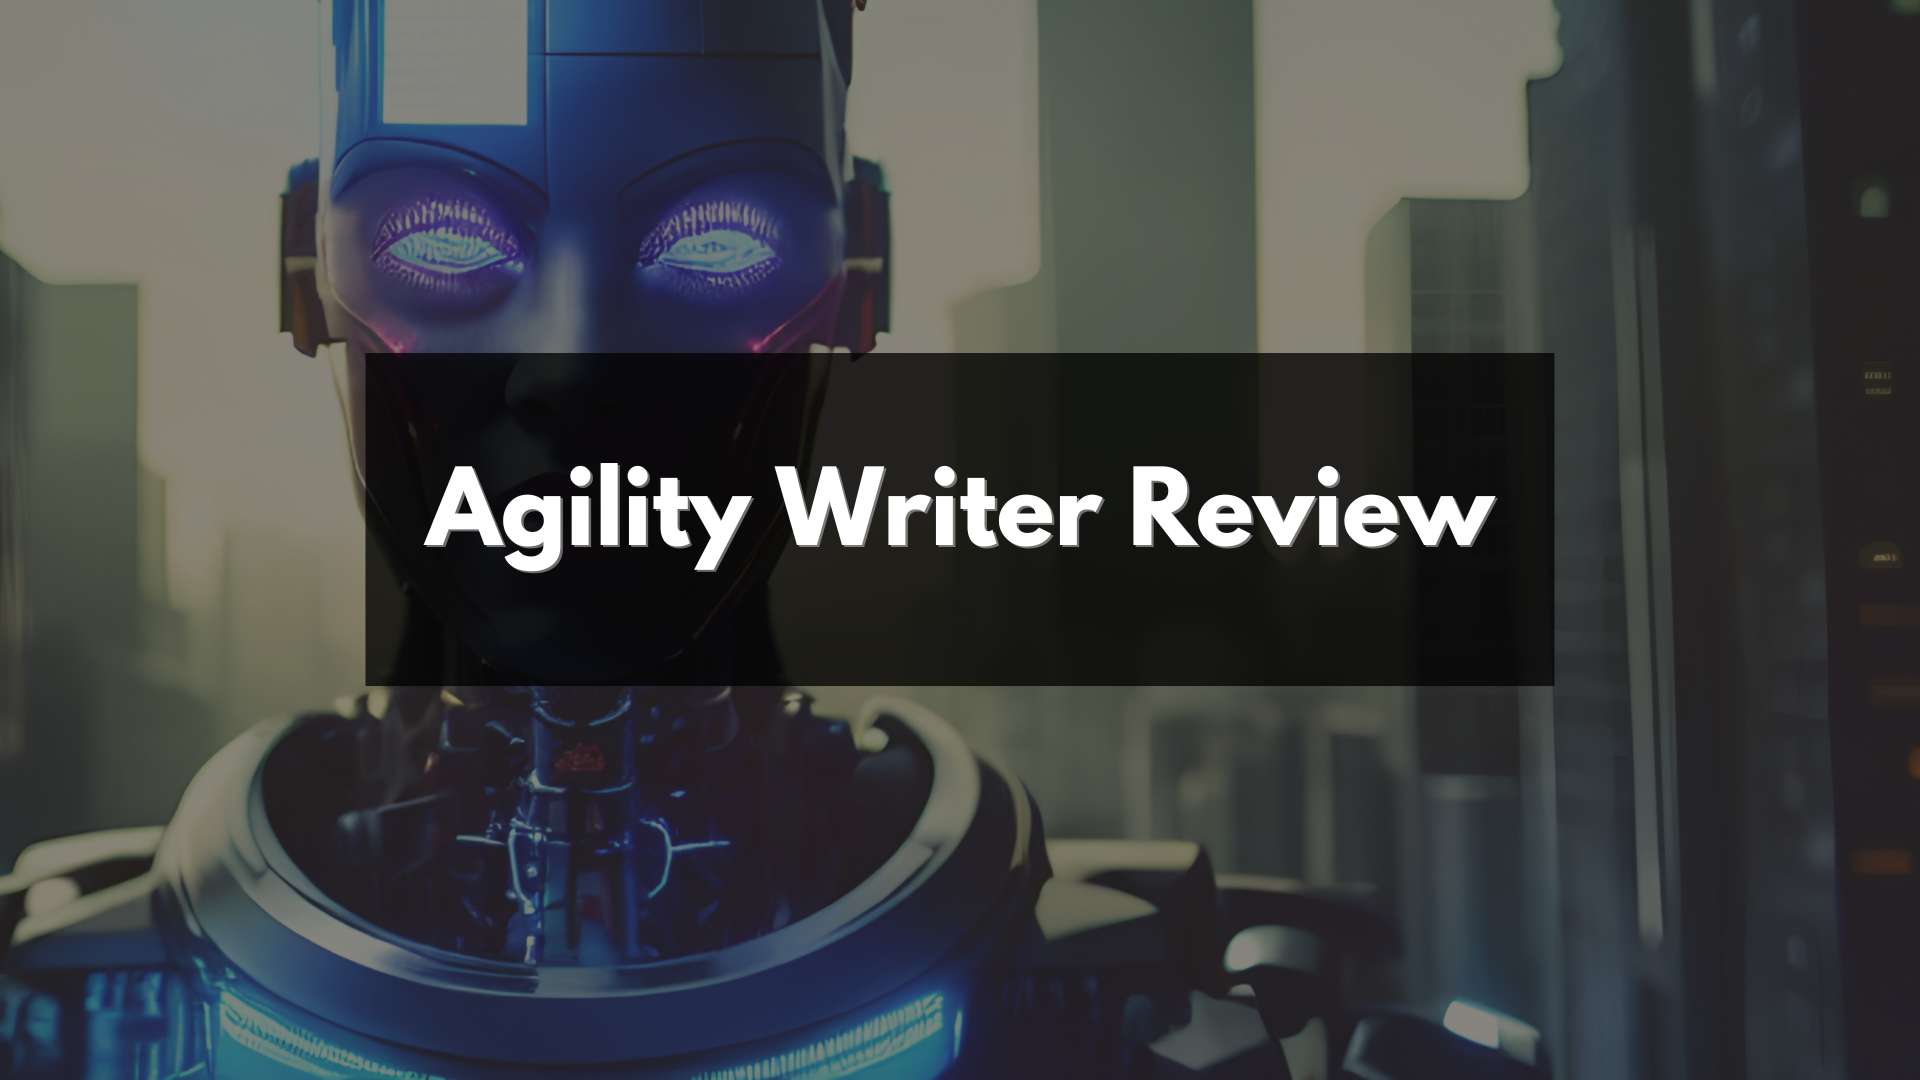 Agility writer review